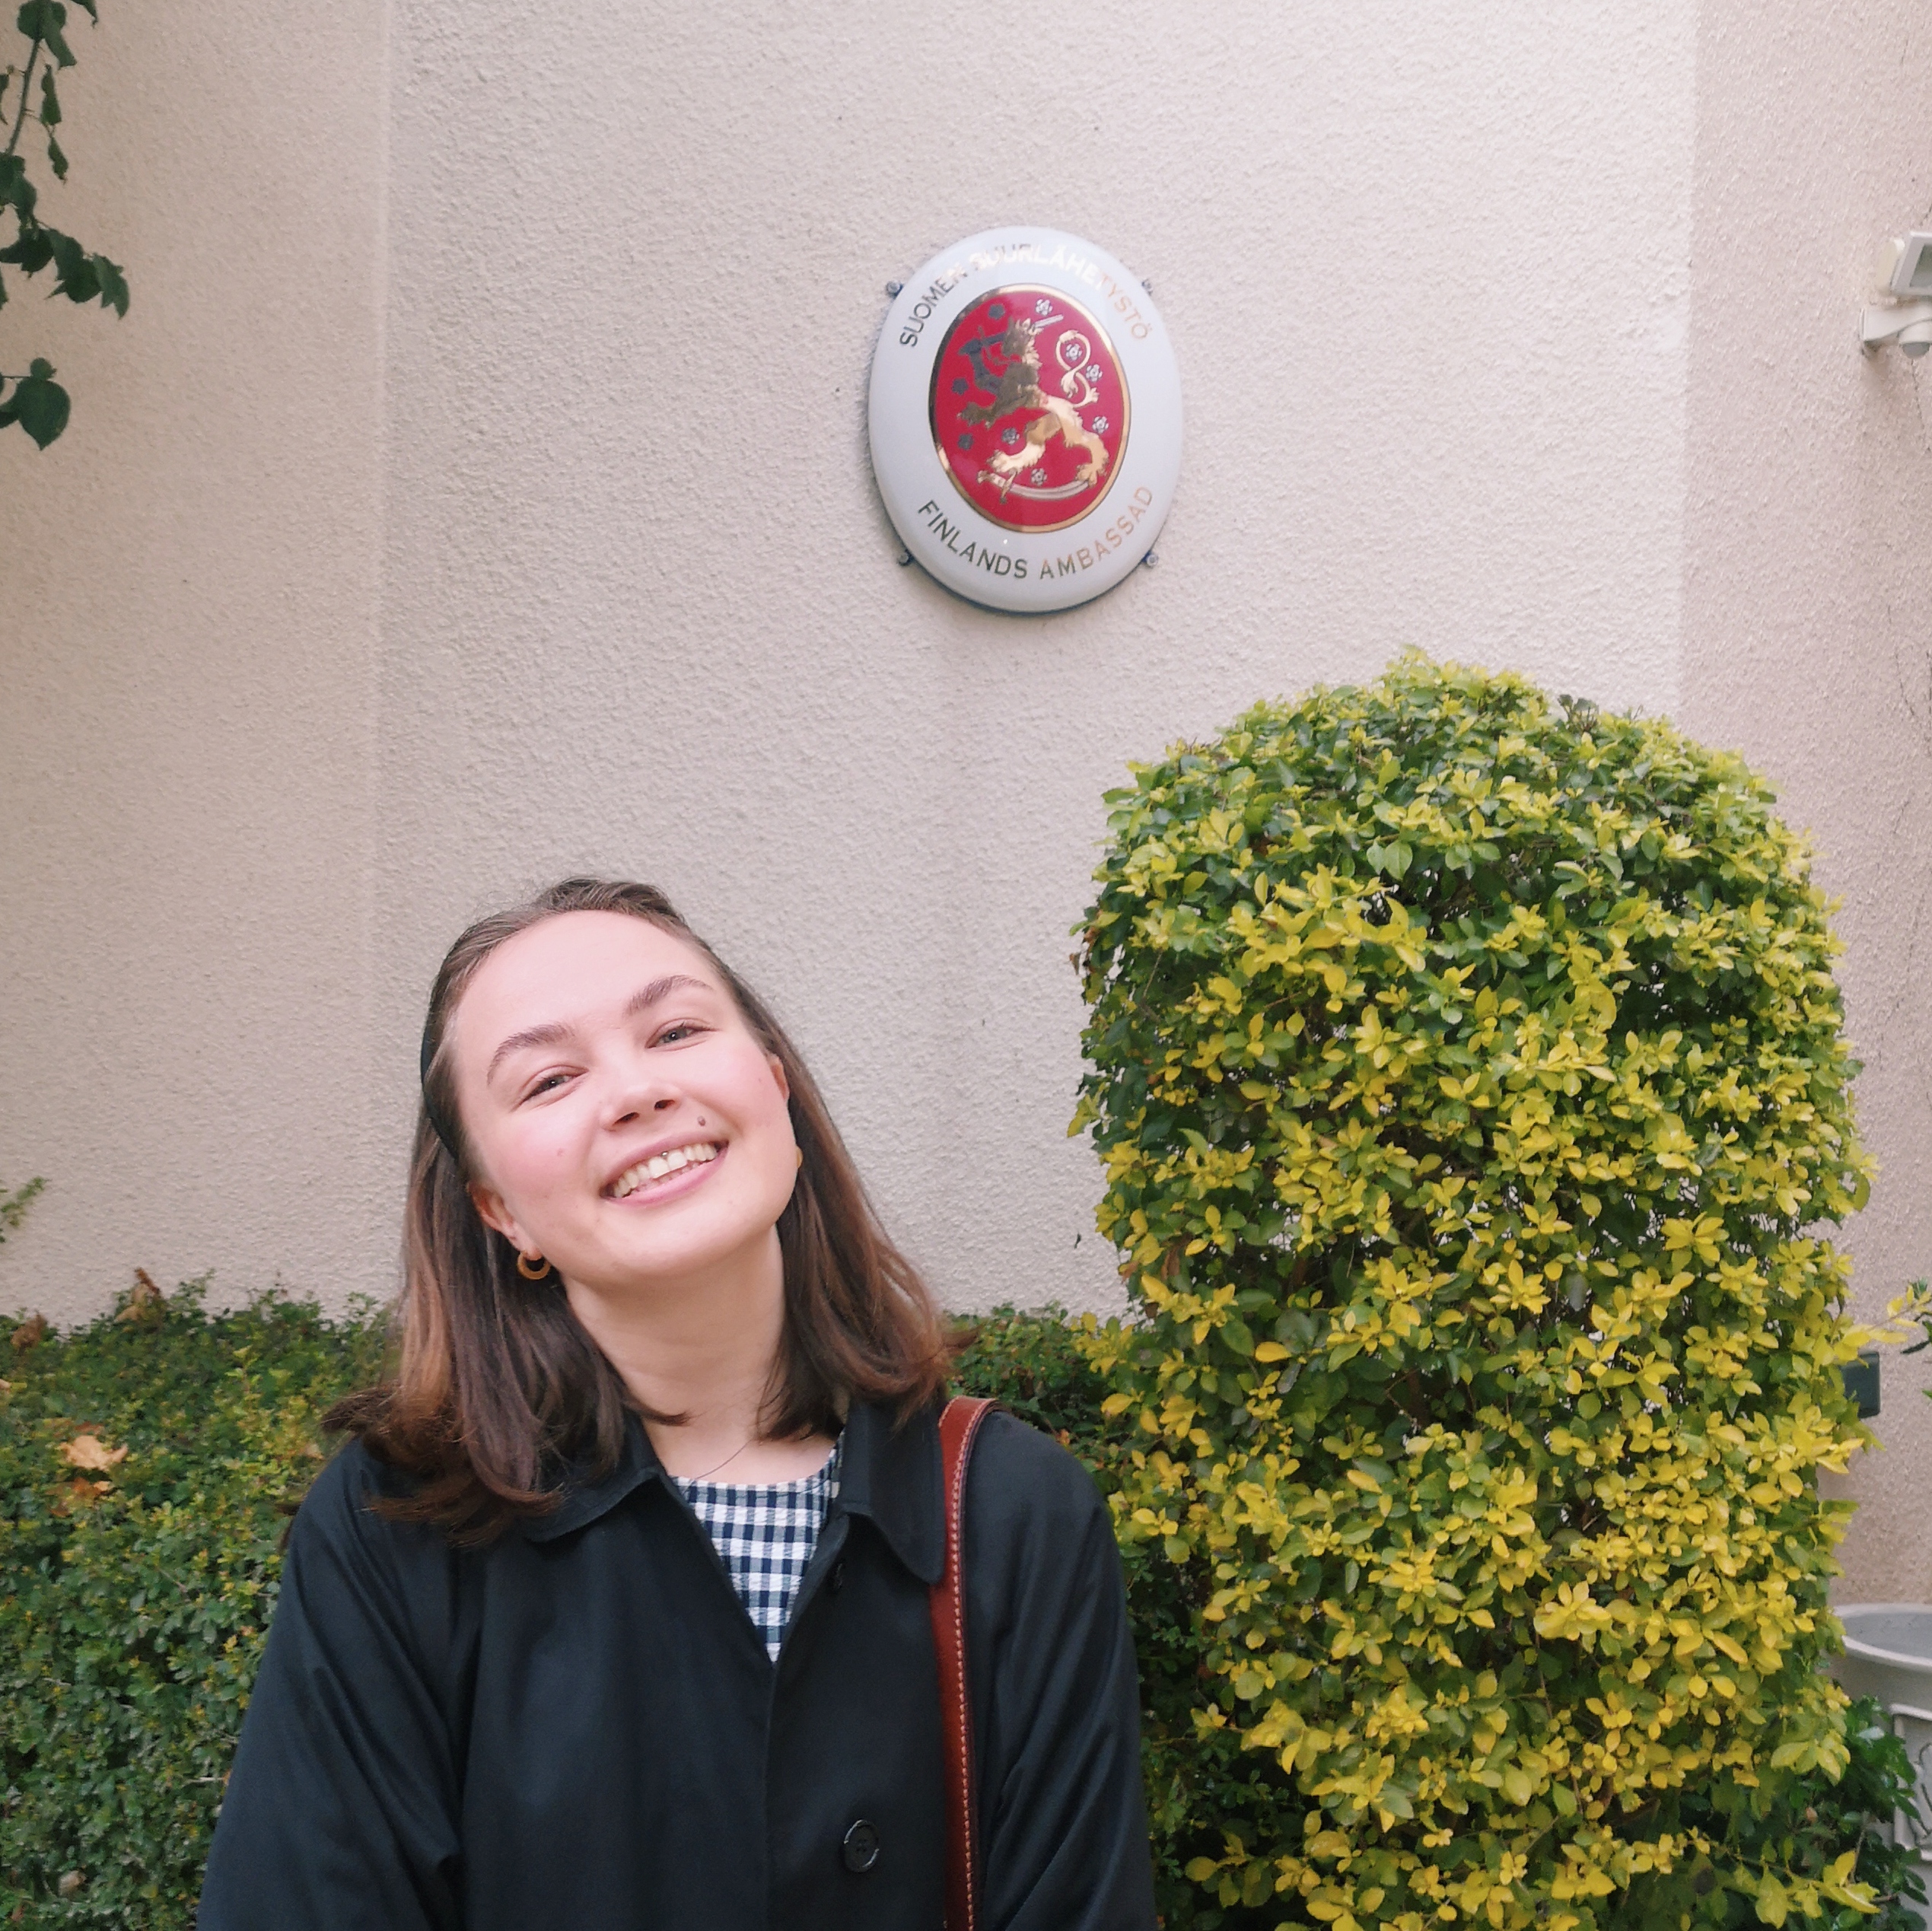 A young woman smiles and poses in front of the Finnish emblem.